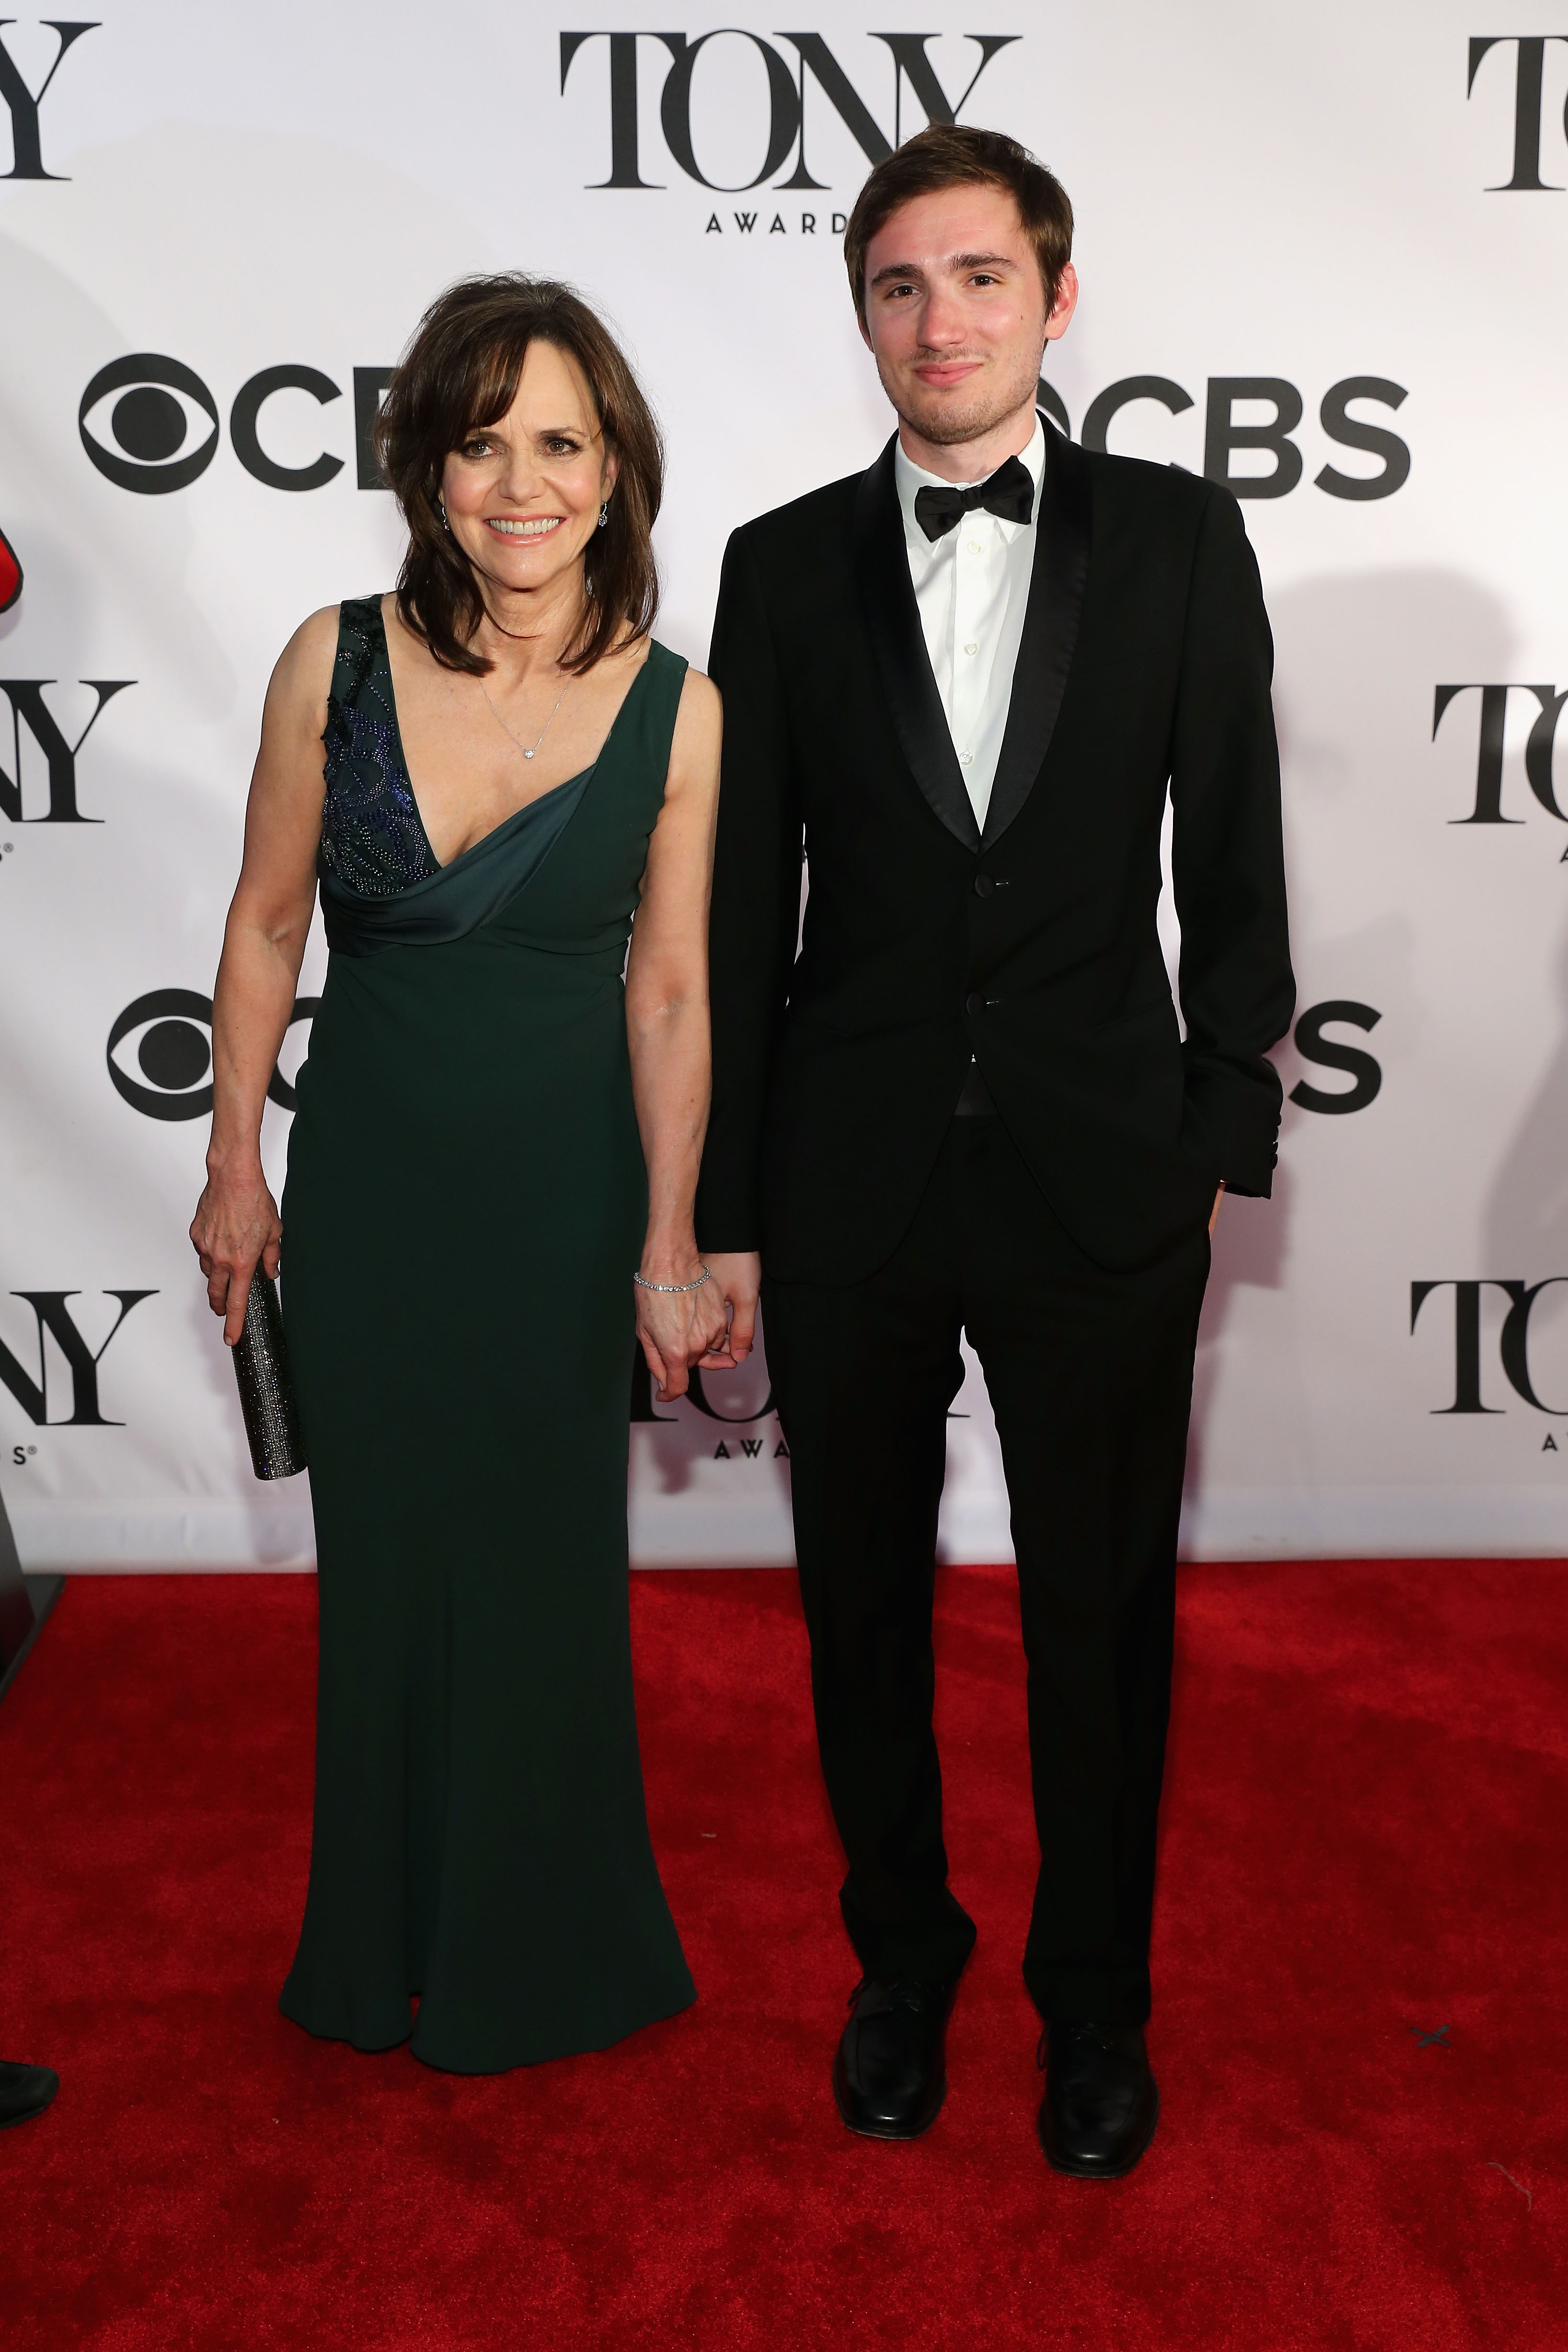 Sally Field and Samuel Greisman at the 67th Annual Tony Awards in New York City, 2013 | Source: Getty Images